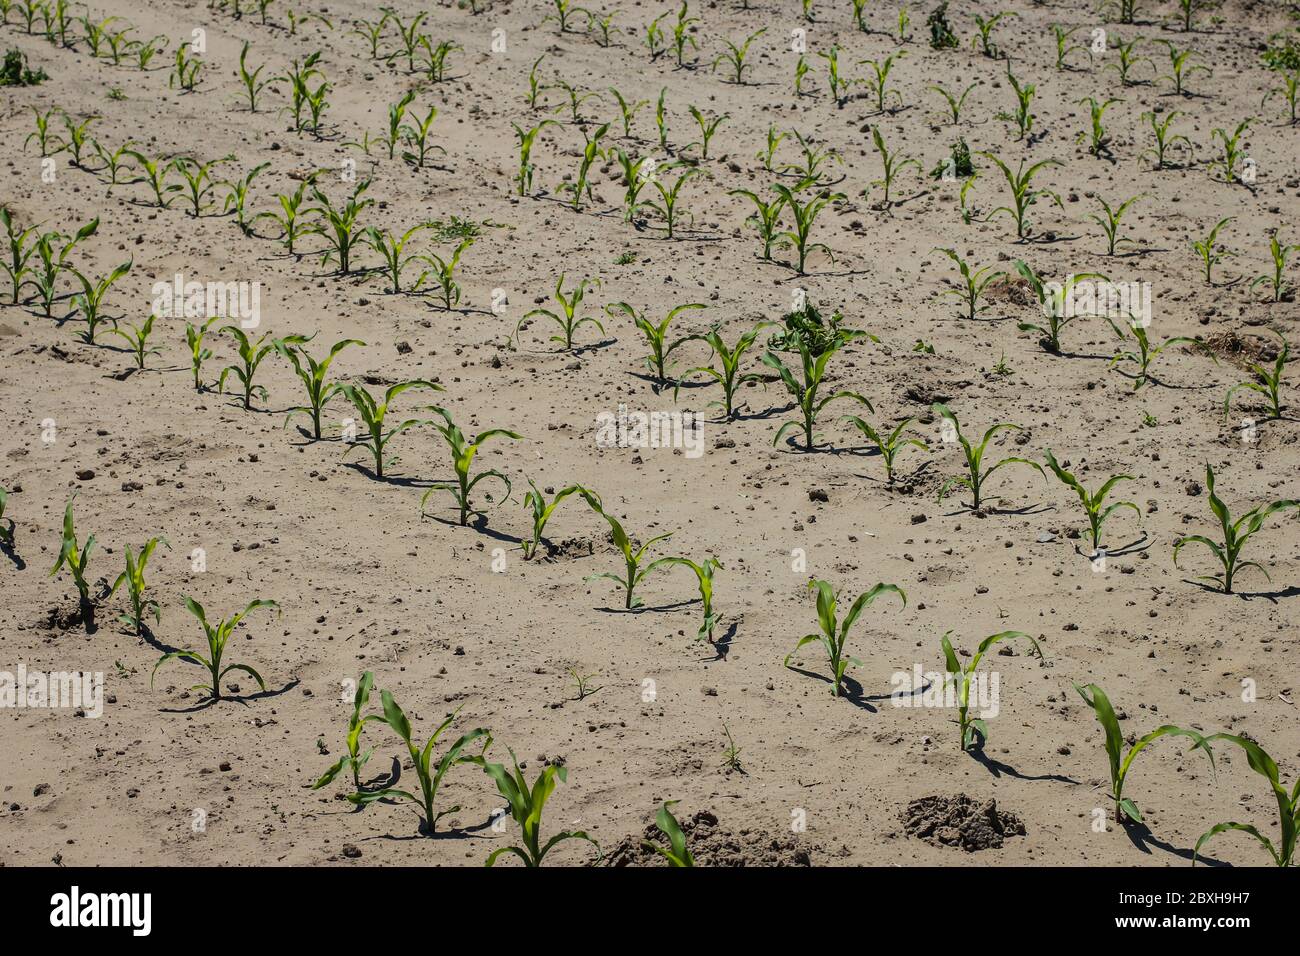 Filed with young corn plants at Subotica Sand in Vojvodina, Serbia Stock Photo